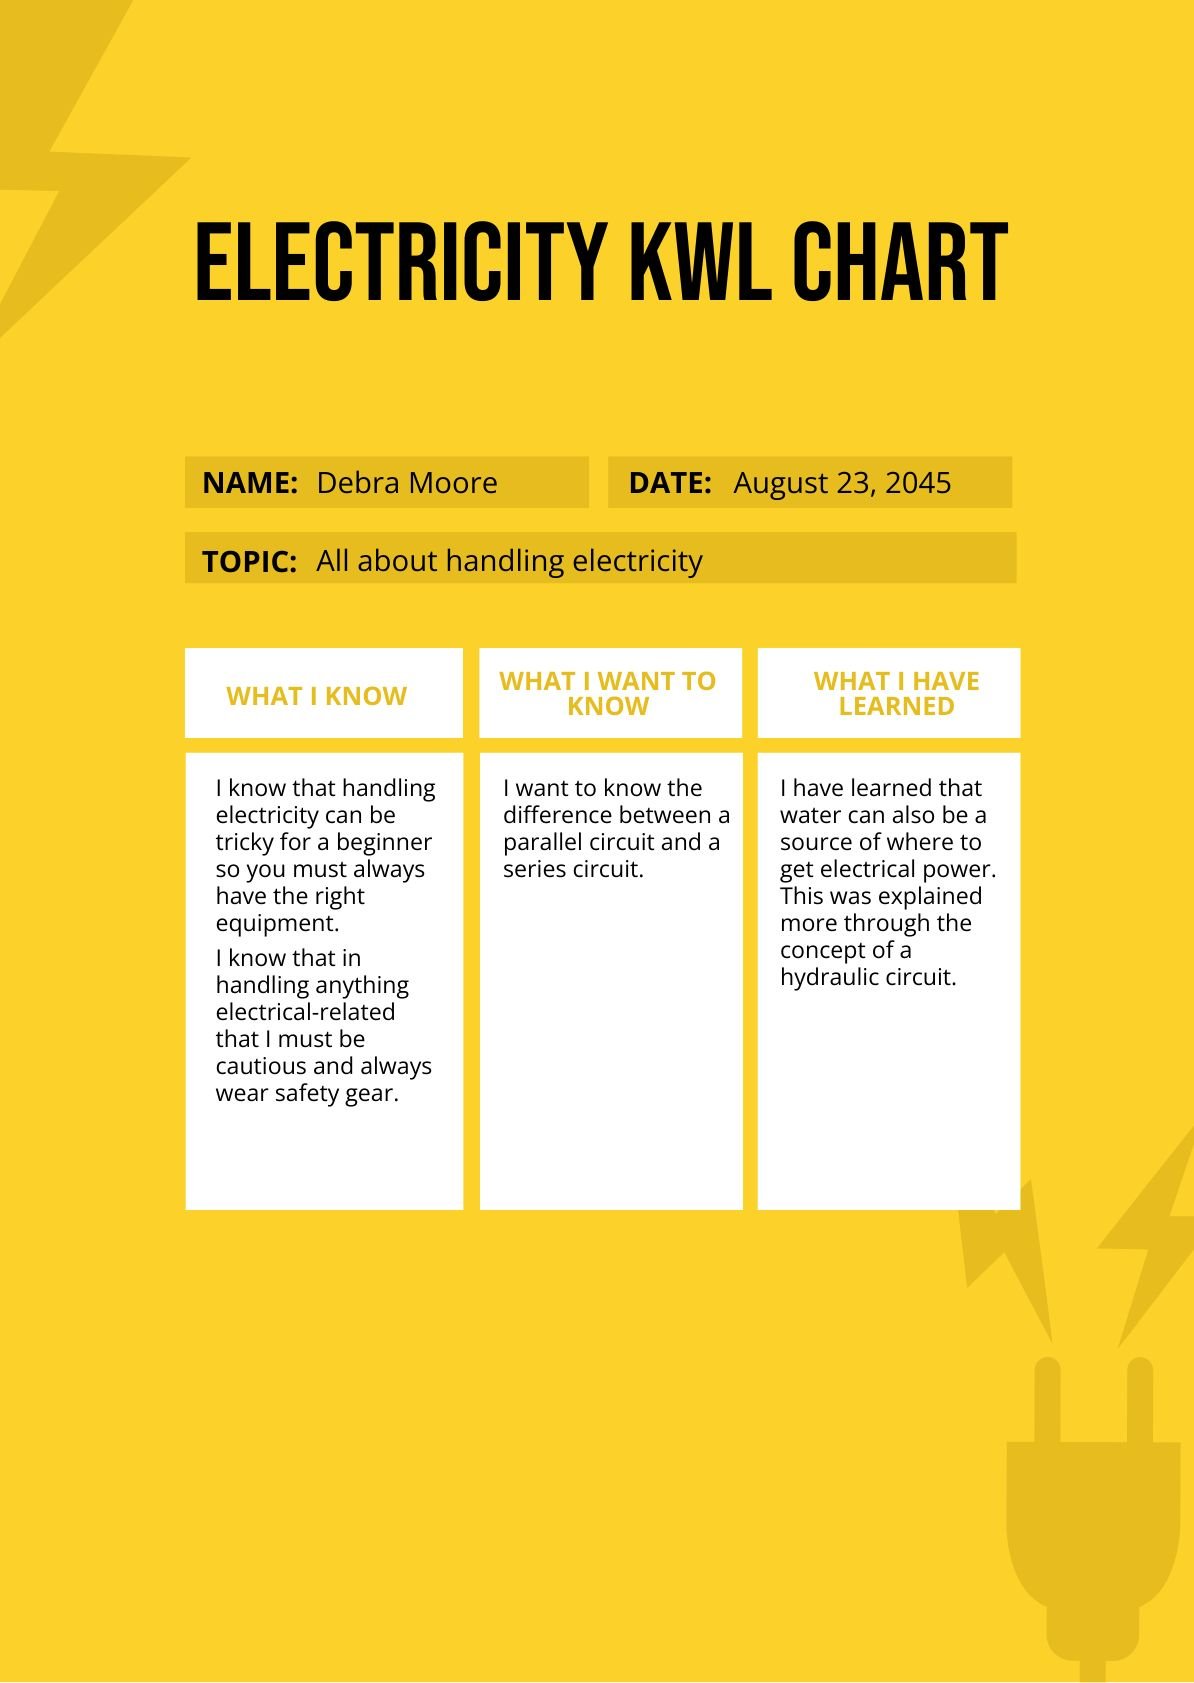 Electricity KWL Chart